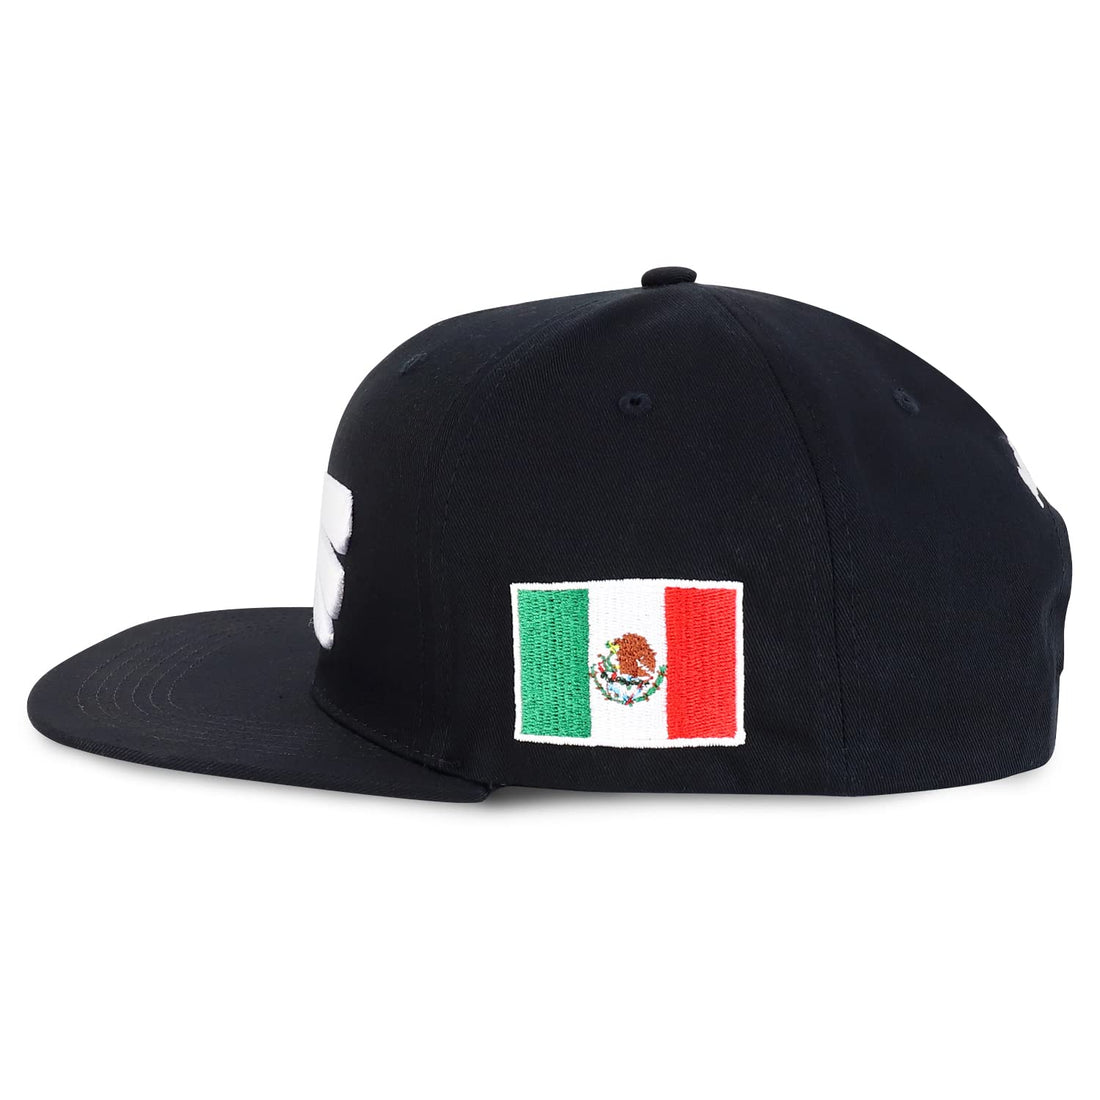 Hecho En Mexico Eagle 3D Embroidered Flat Bill Snapback Cap